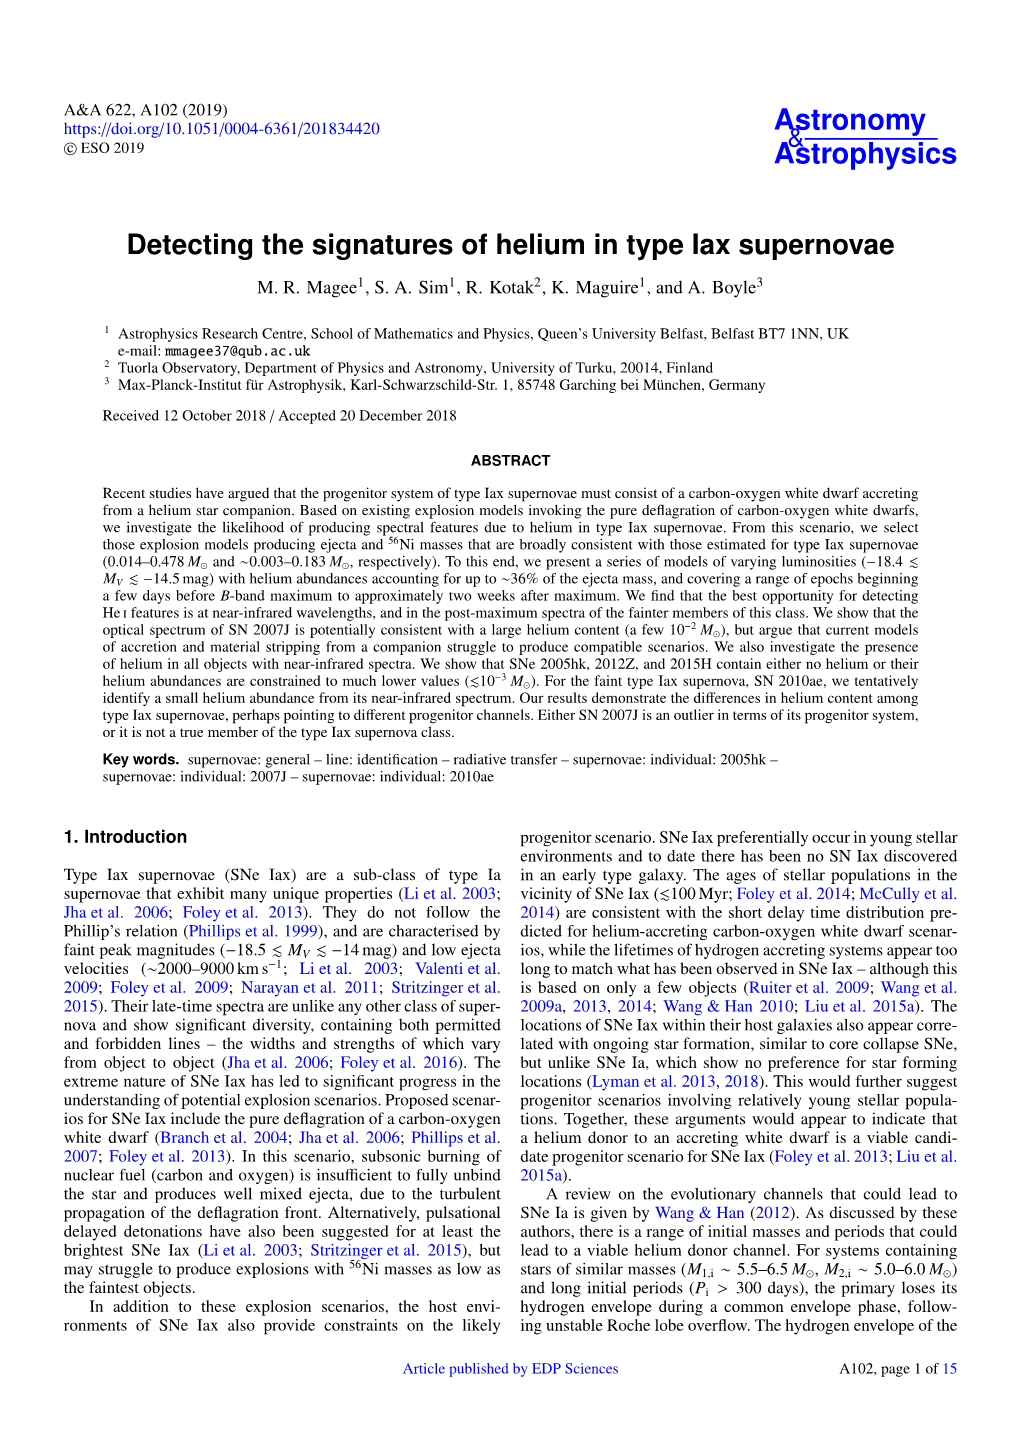 Detecting the Signatures of Helium in Type Iax Supernovae M